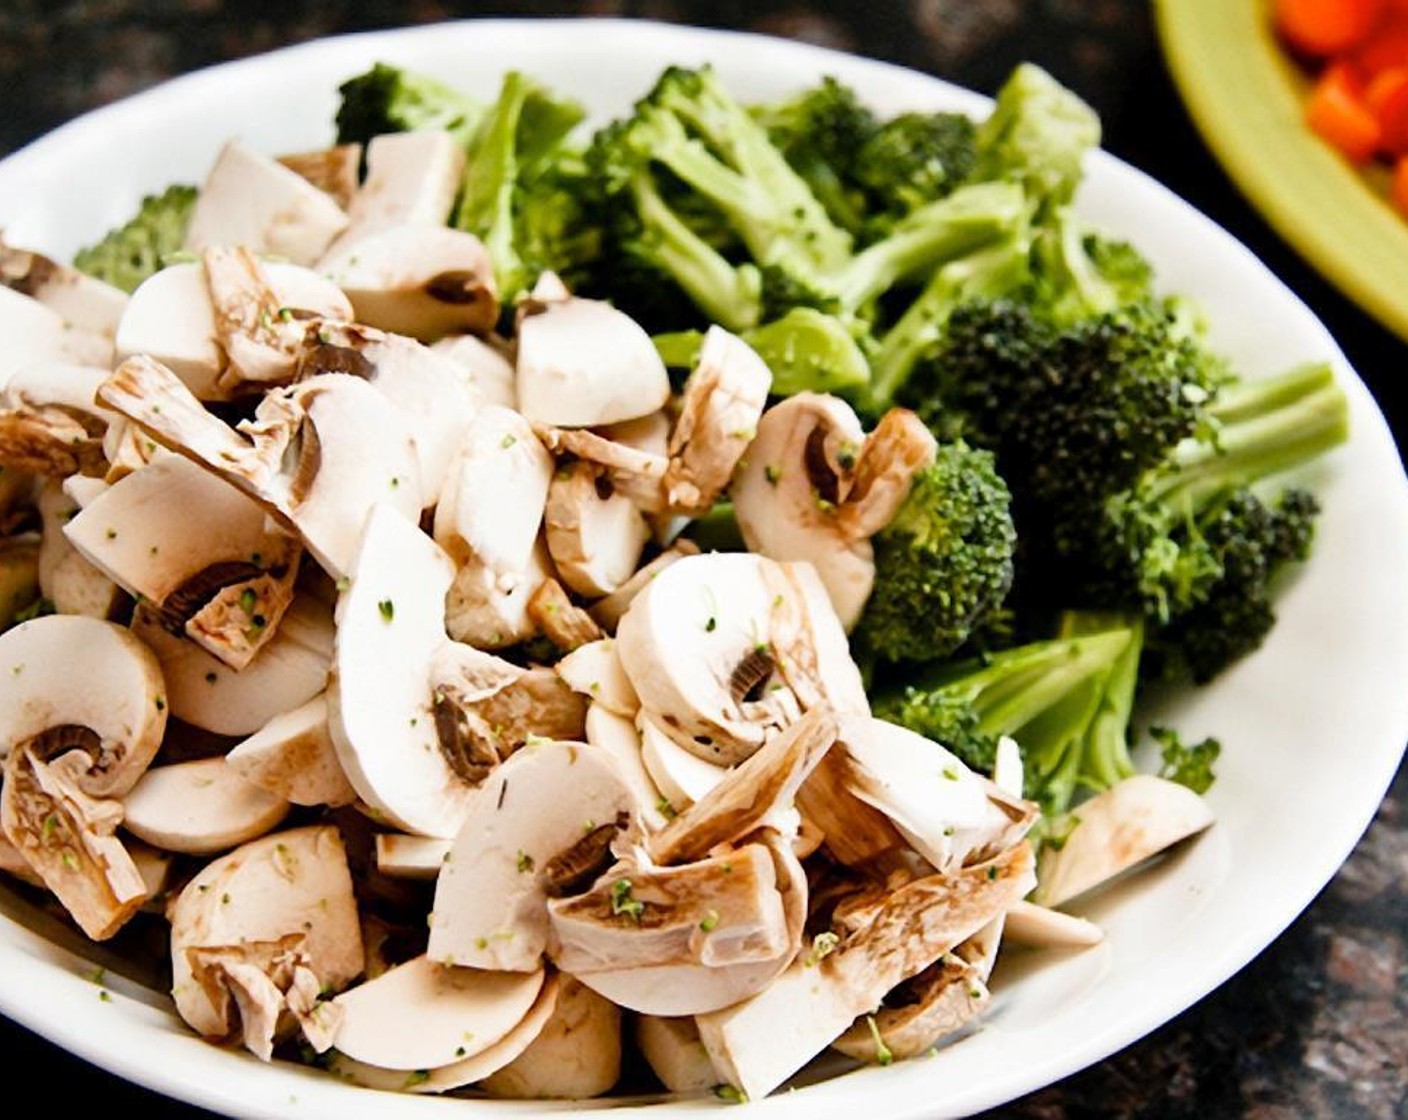 step 4 Chop the Broccoli (1 1/2 cups) and Mushrooms (1 1/2 cups).